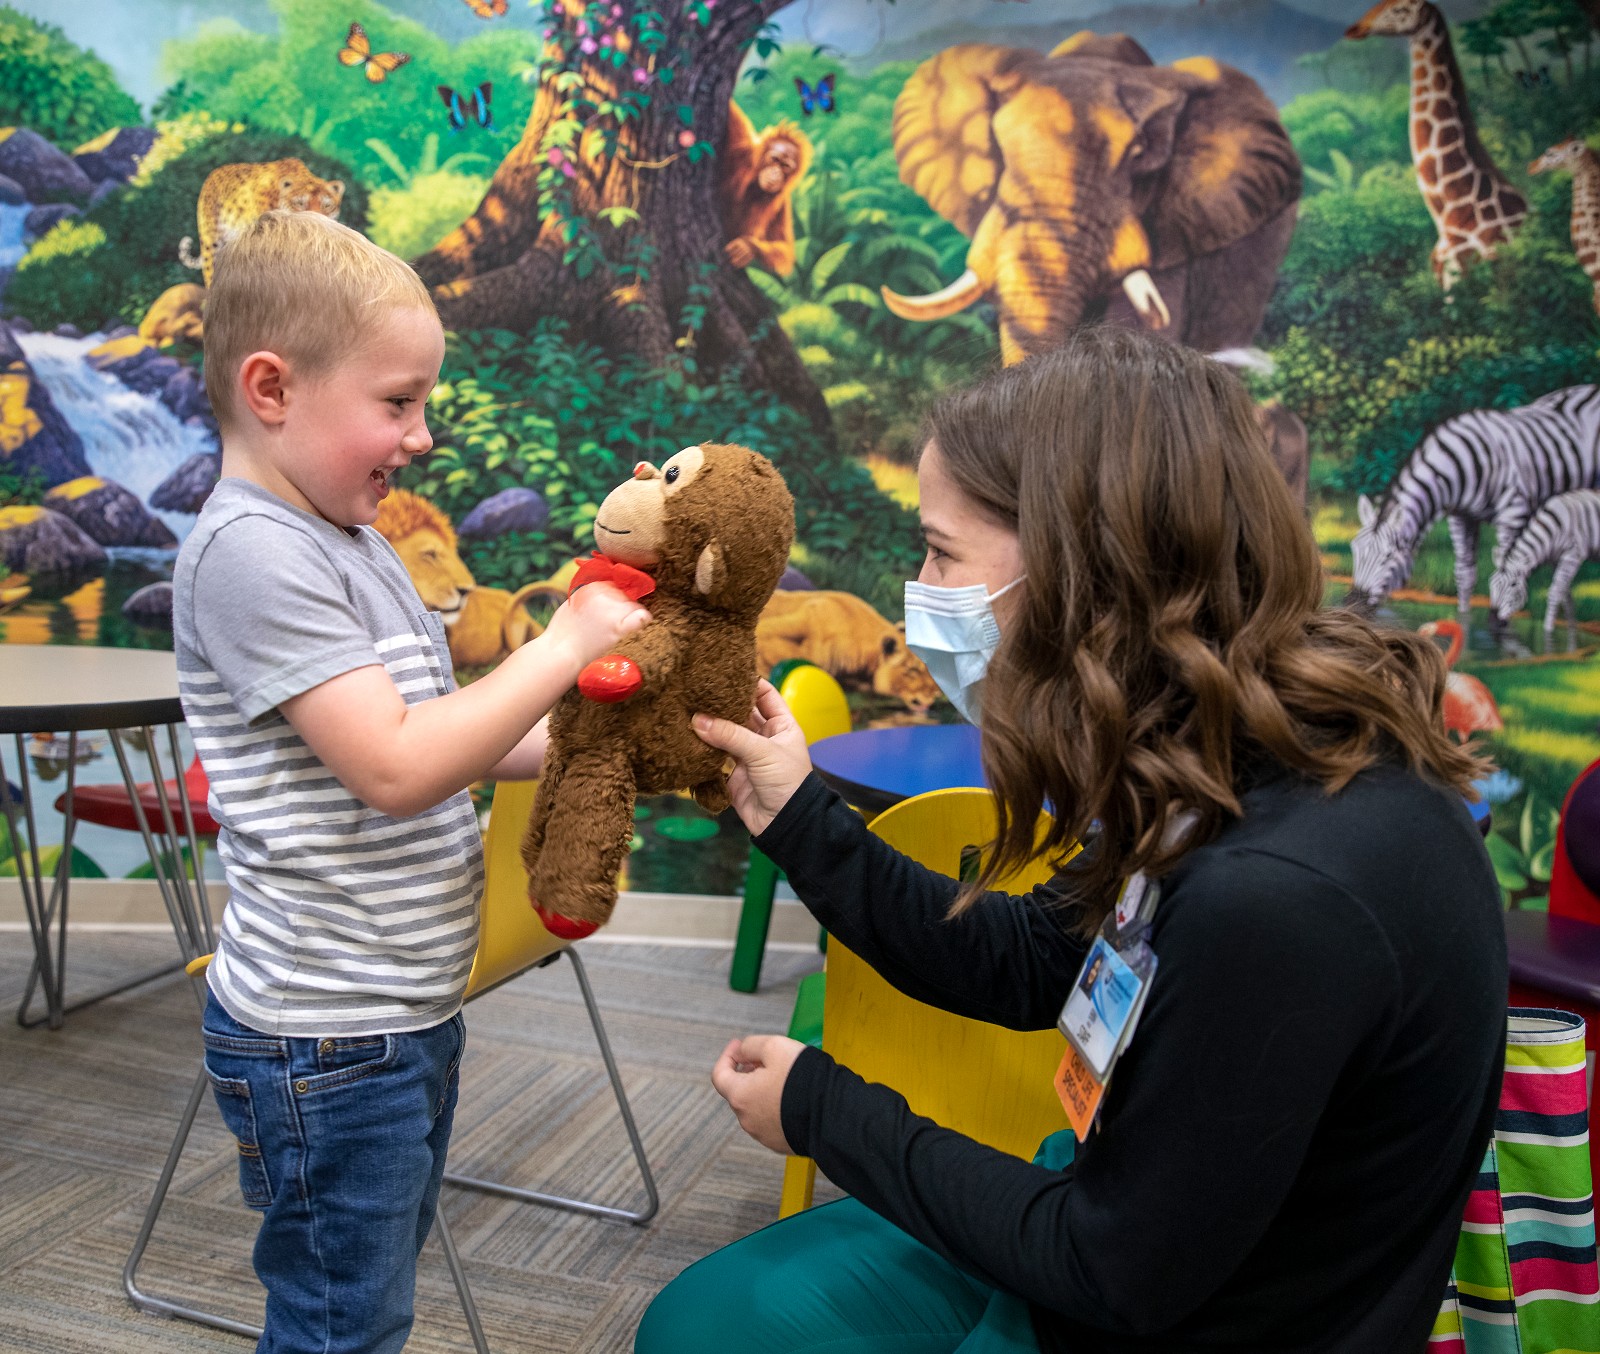 Penn State Health Child Life specialist Erin Palm hands a stuffed monkey to pediatric patient Logan in the radiology waiting room, which has a colorful safari mural on the wall